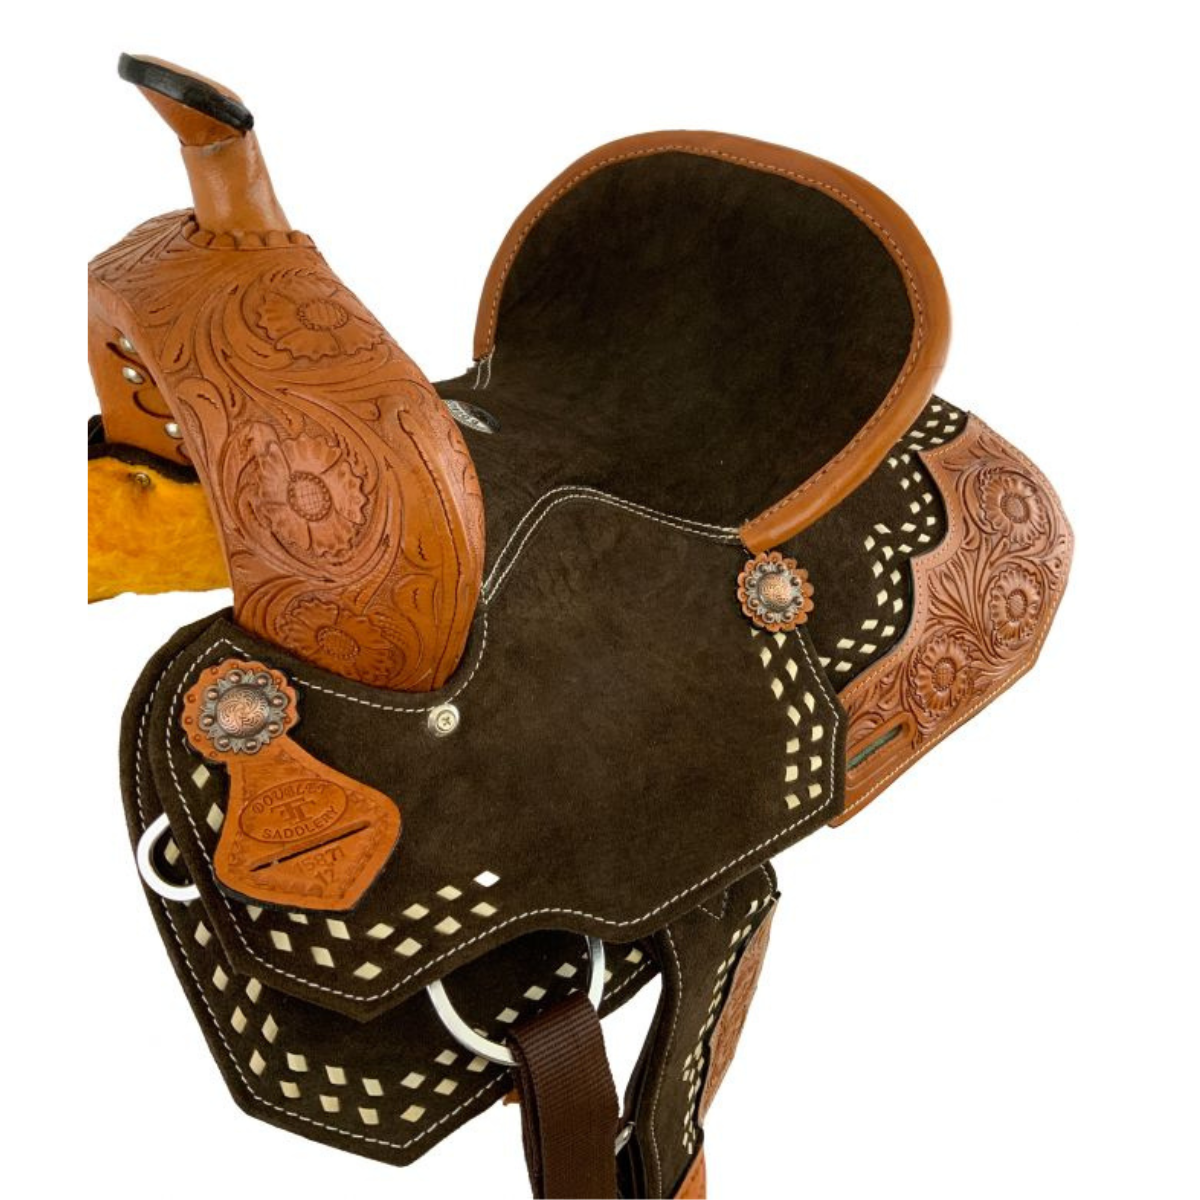 12" Double T Youth Brown Suede Barrel Saddle With Floral Tooling and White Buckstitching. - Double T Saddles